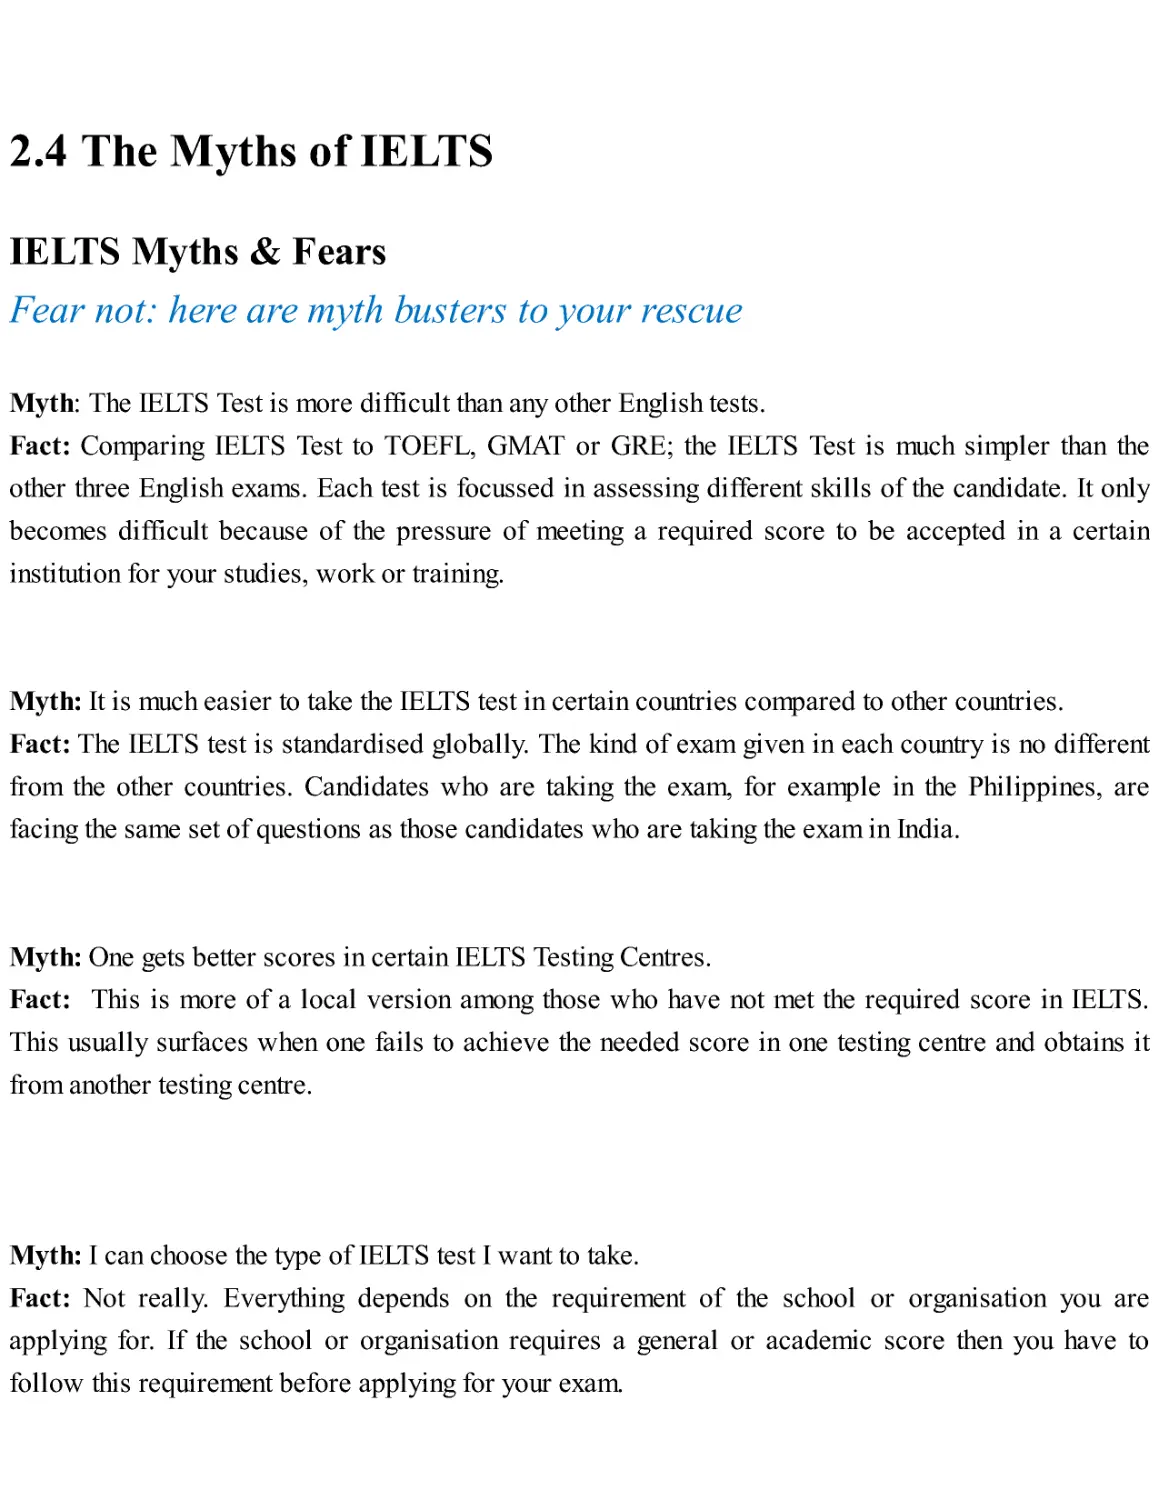 2.4 The Myths of IELTS